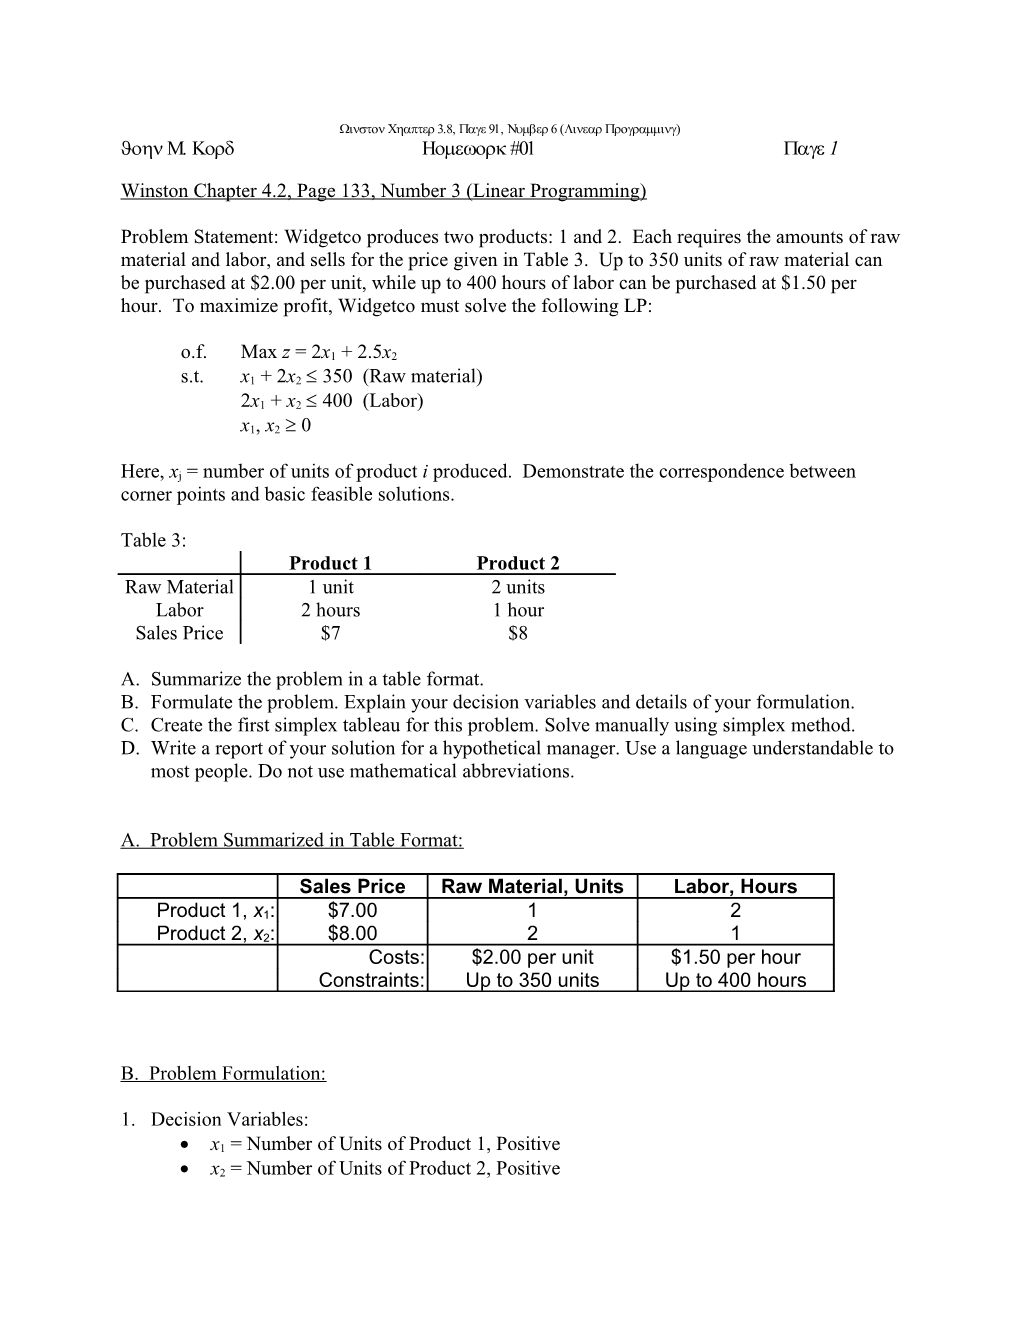 Winston Chapter 4.2, Page 133, Number 3 (Linear Programming)